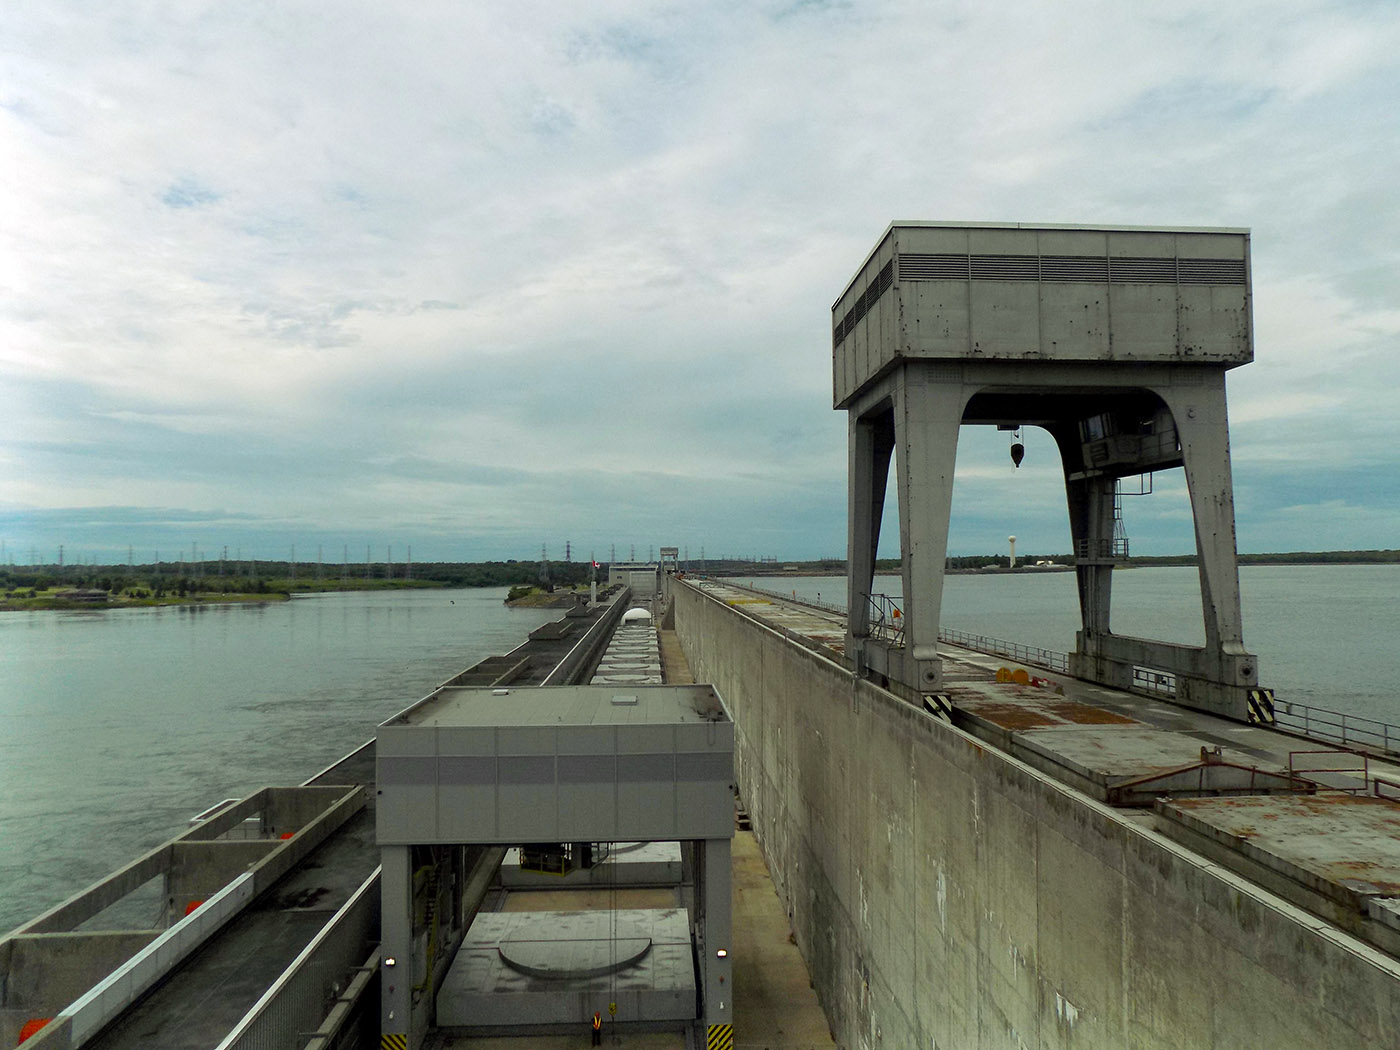 Looking across the Robert H. Saunders St. Lawrence Generating Station towards the New York Power Authority's Franklin Delano Roosevelt St. Lawrence station. The two high structures are gantry cranes that travel on tracks for generator maintenance. The square covers are the tops of the generator units. Photo: James Morgan